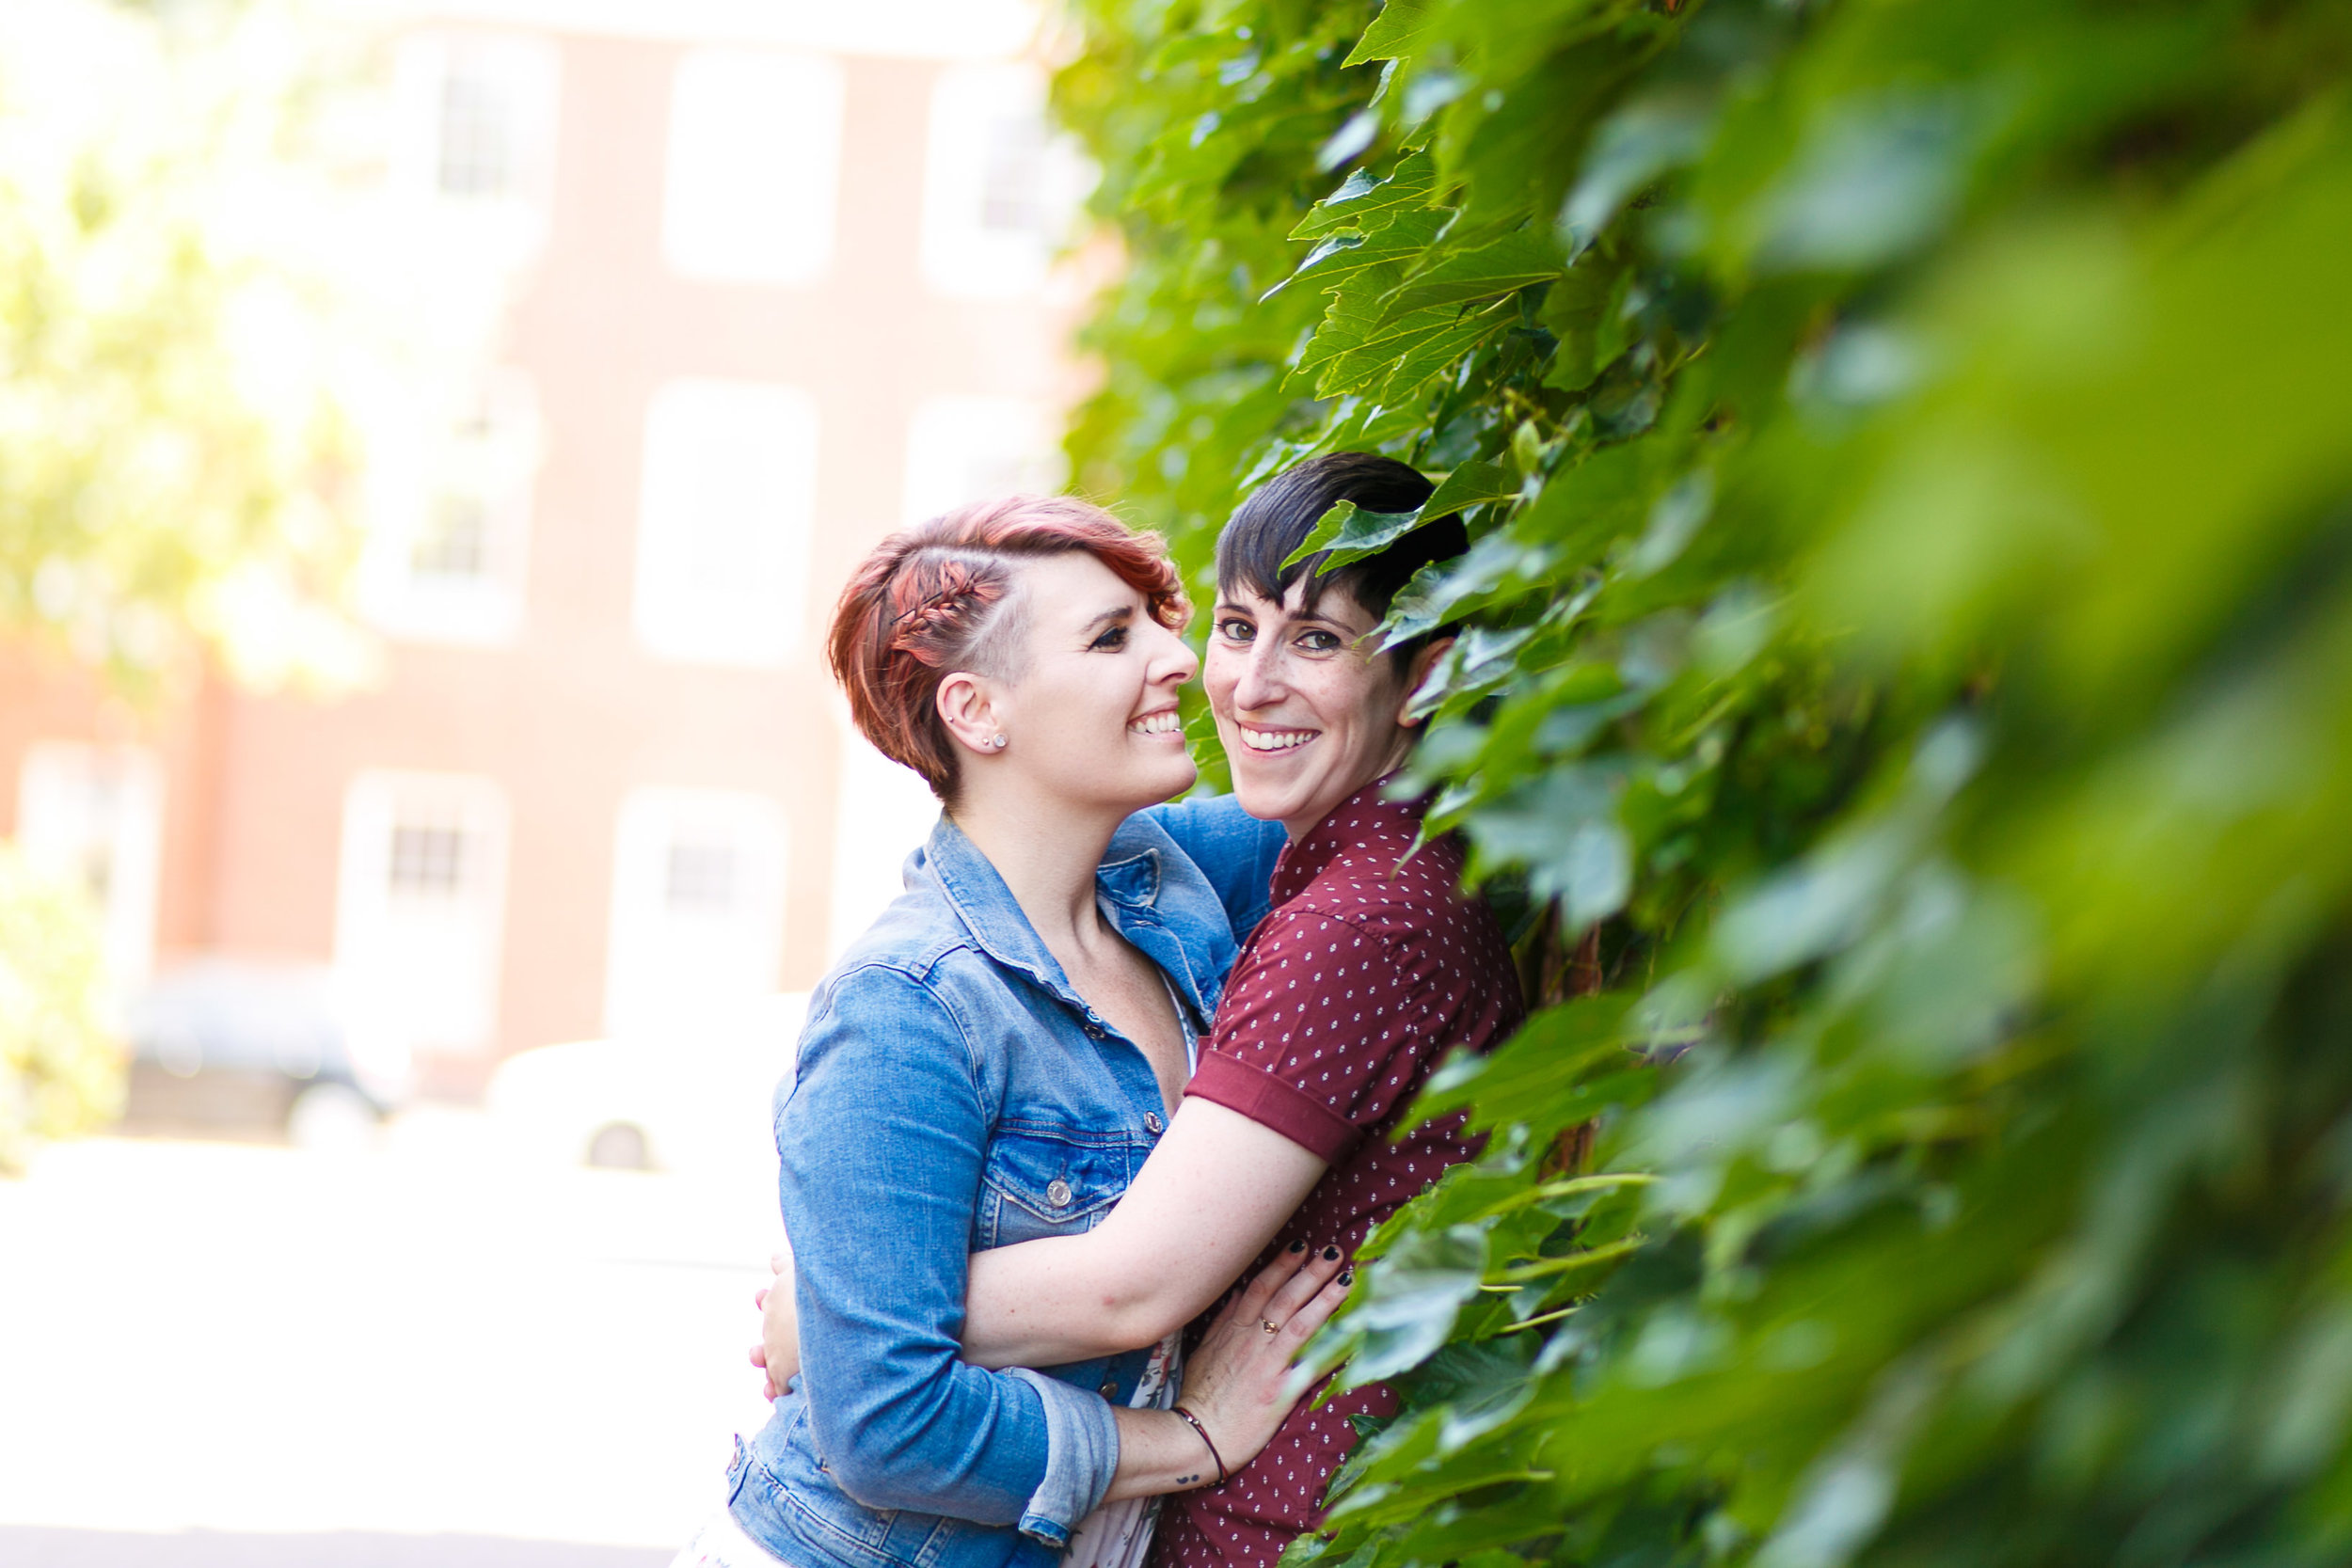 LGBTQ Baltimore Engagement Session with lesbian photographer Swiger Photography31.jpg